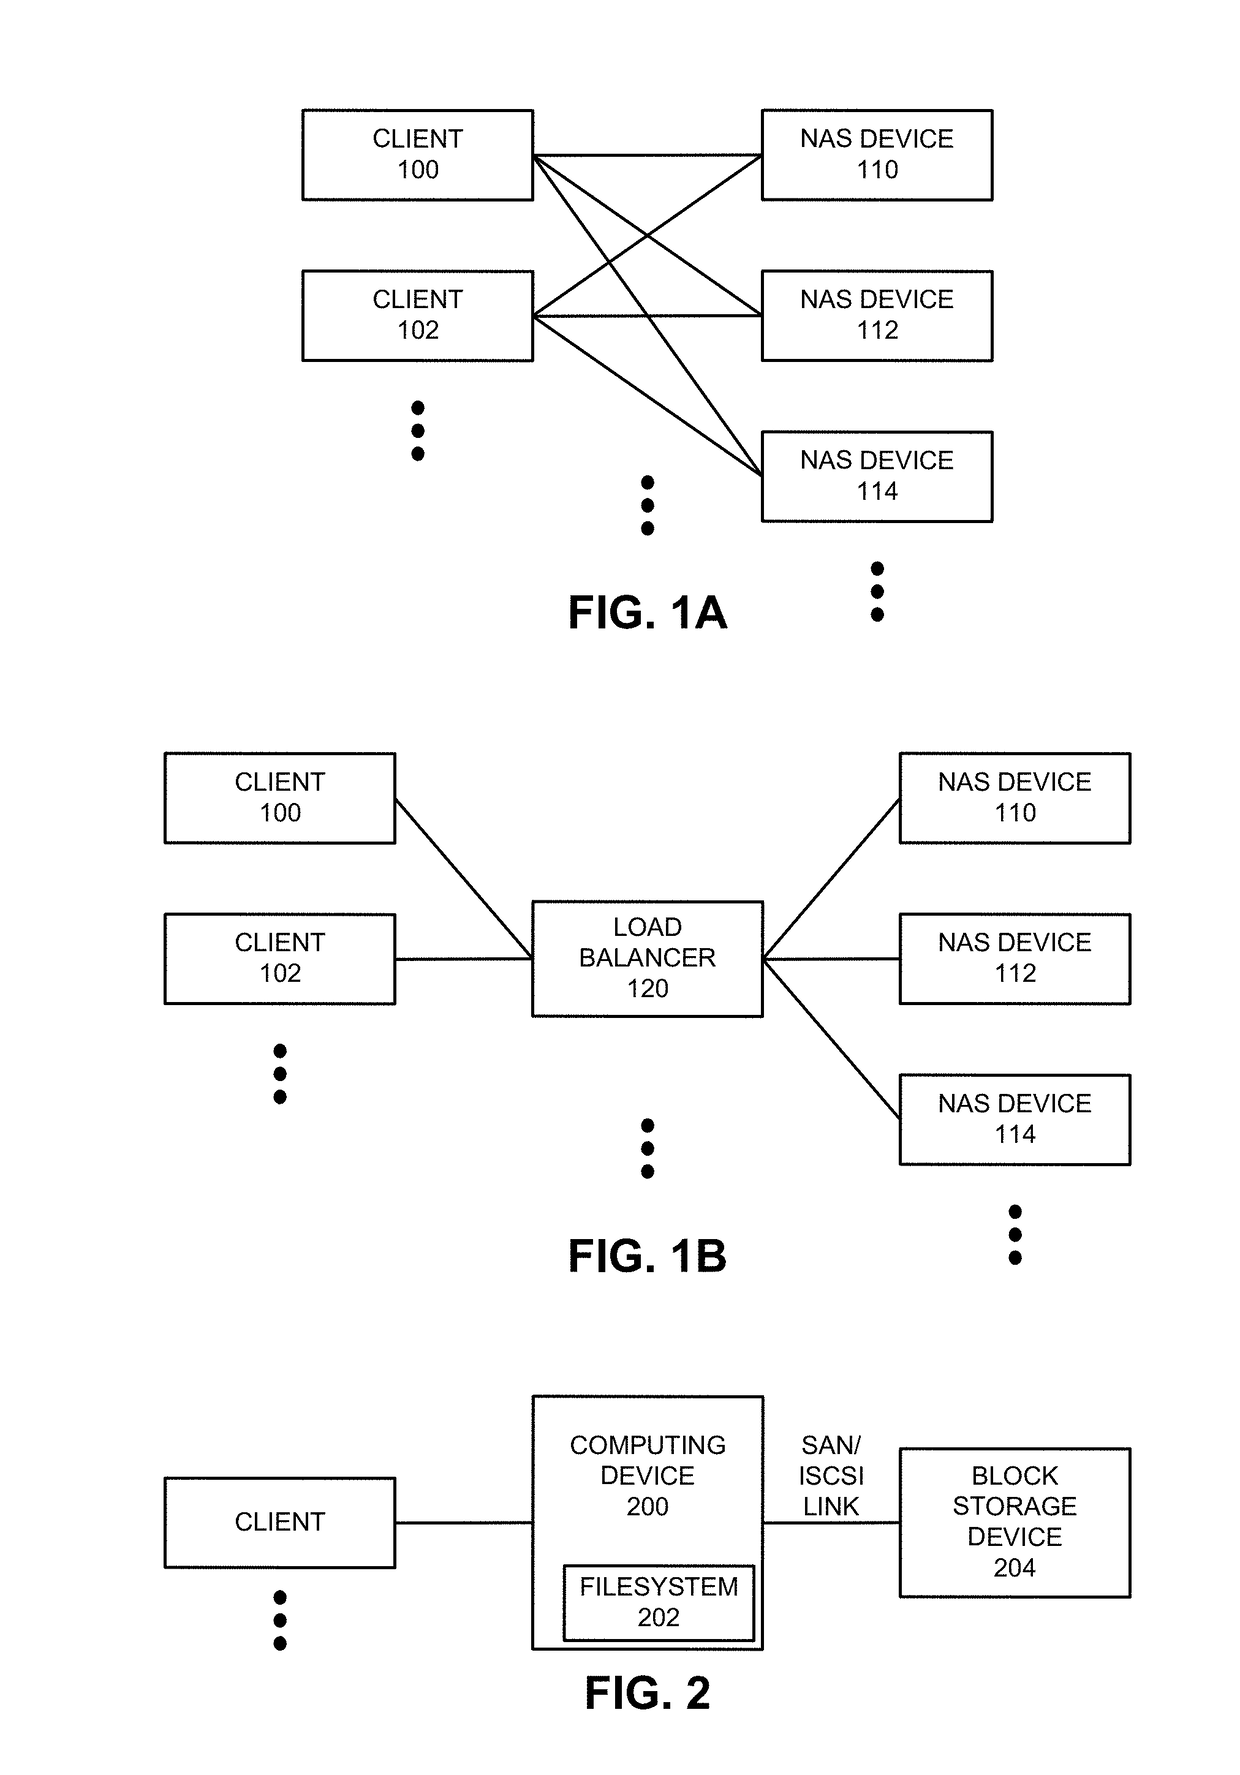 Transferring and caching a cloud file in a distributed filesystem